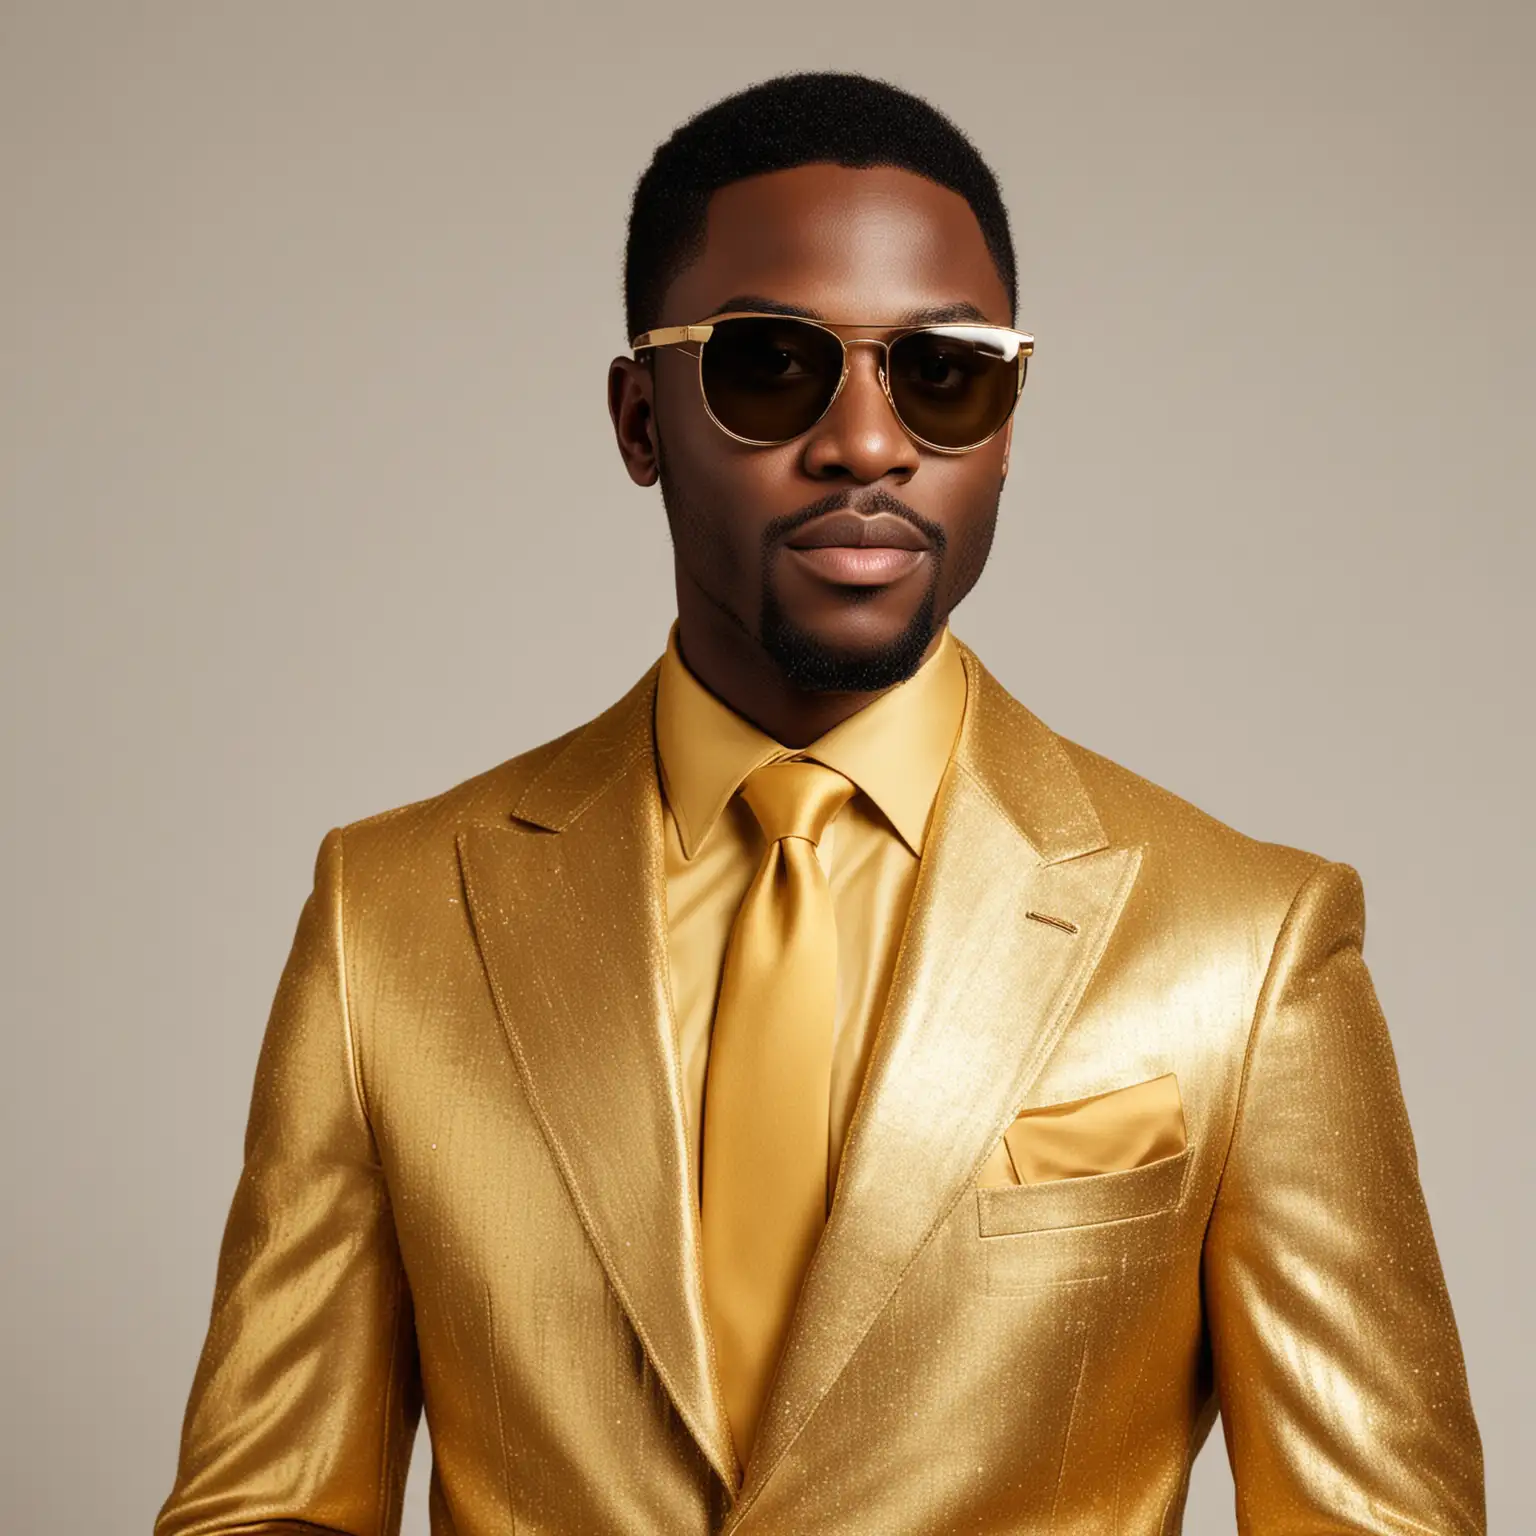 Black Man in Gold Suit and Glasses